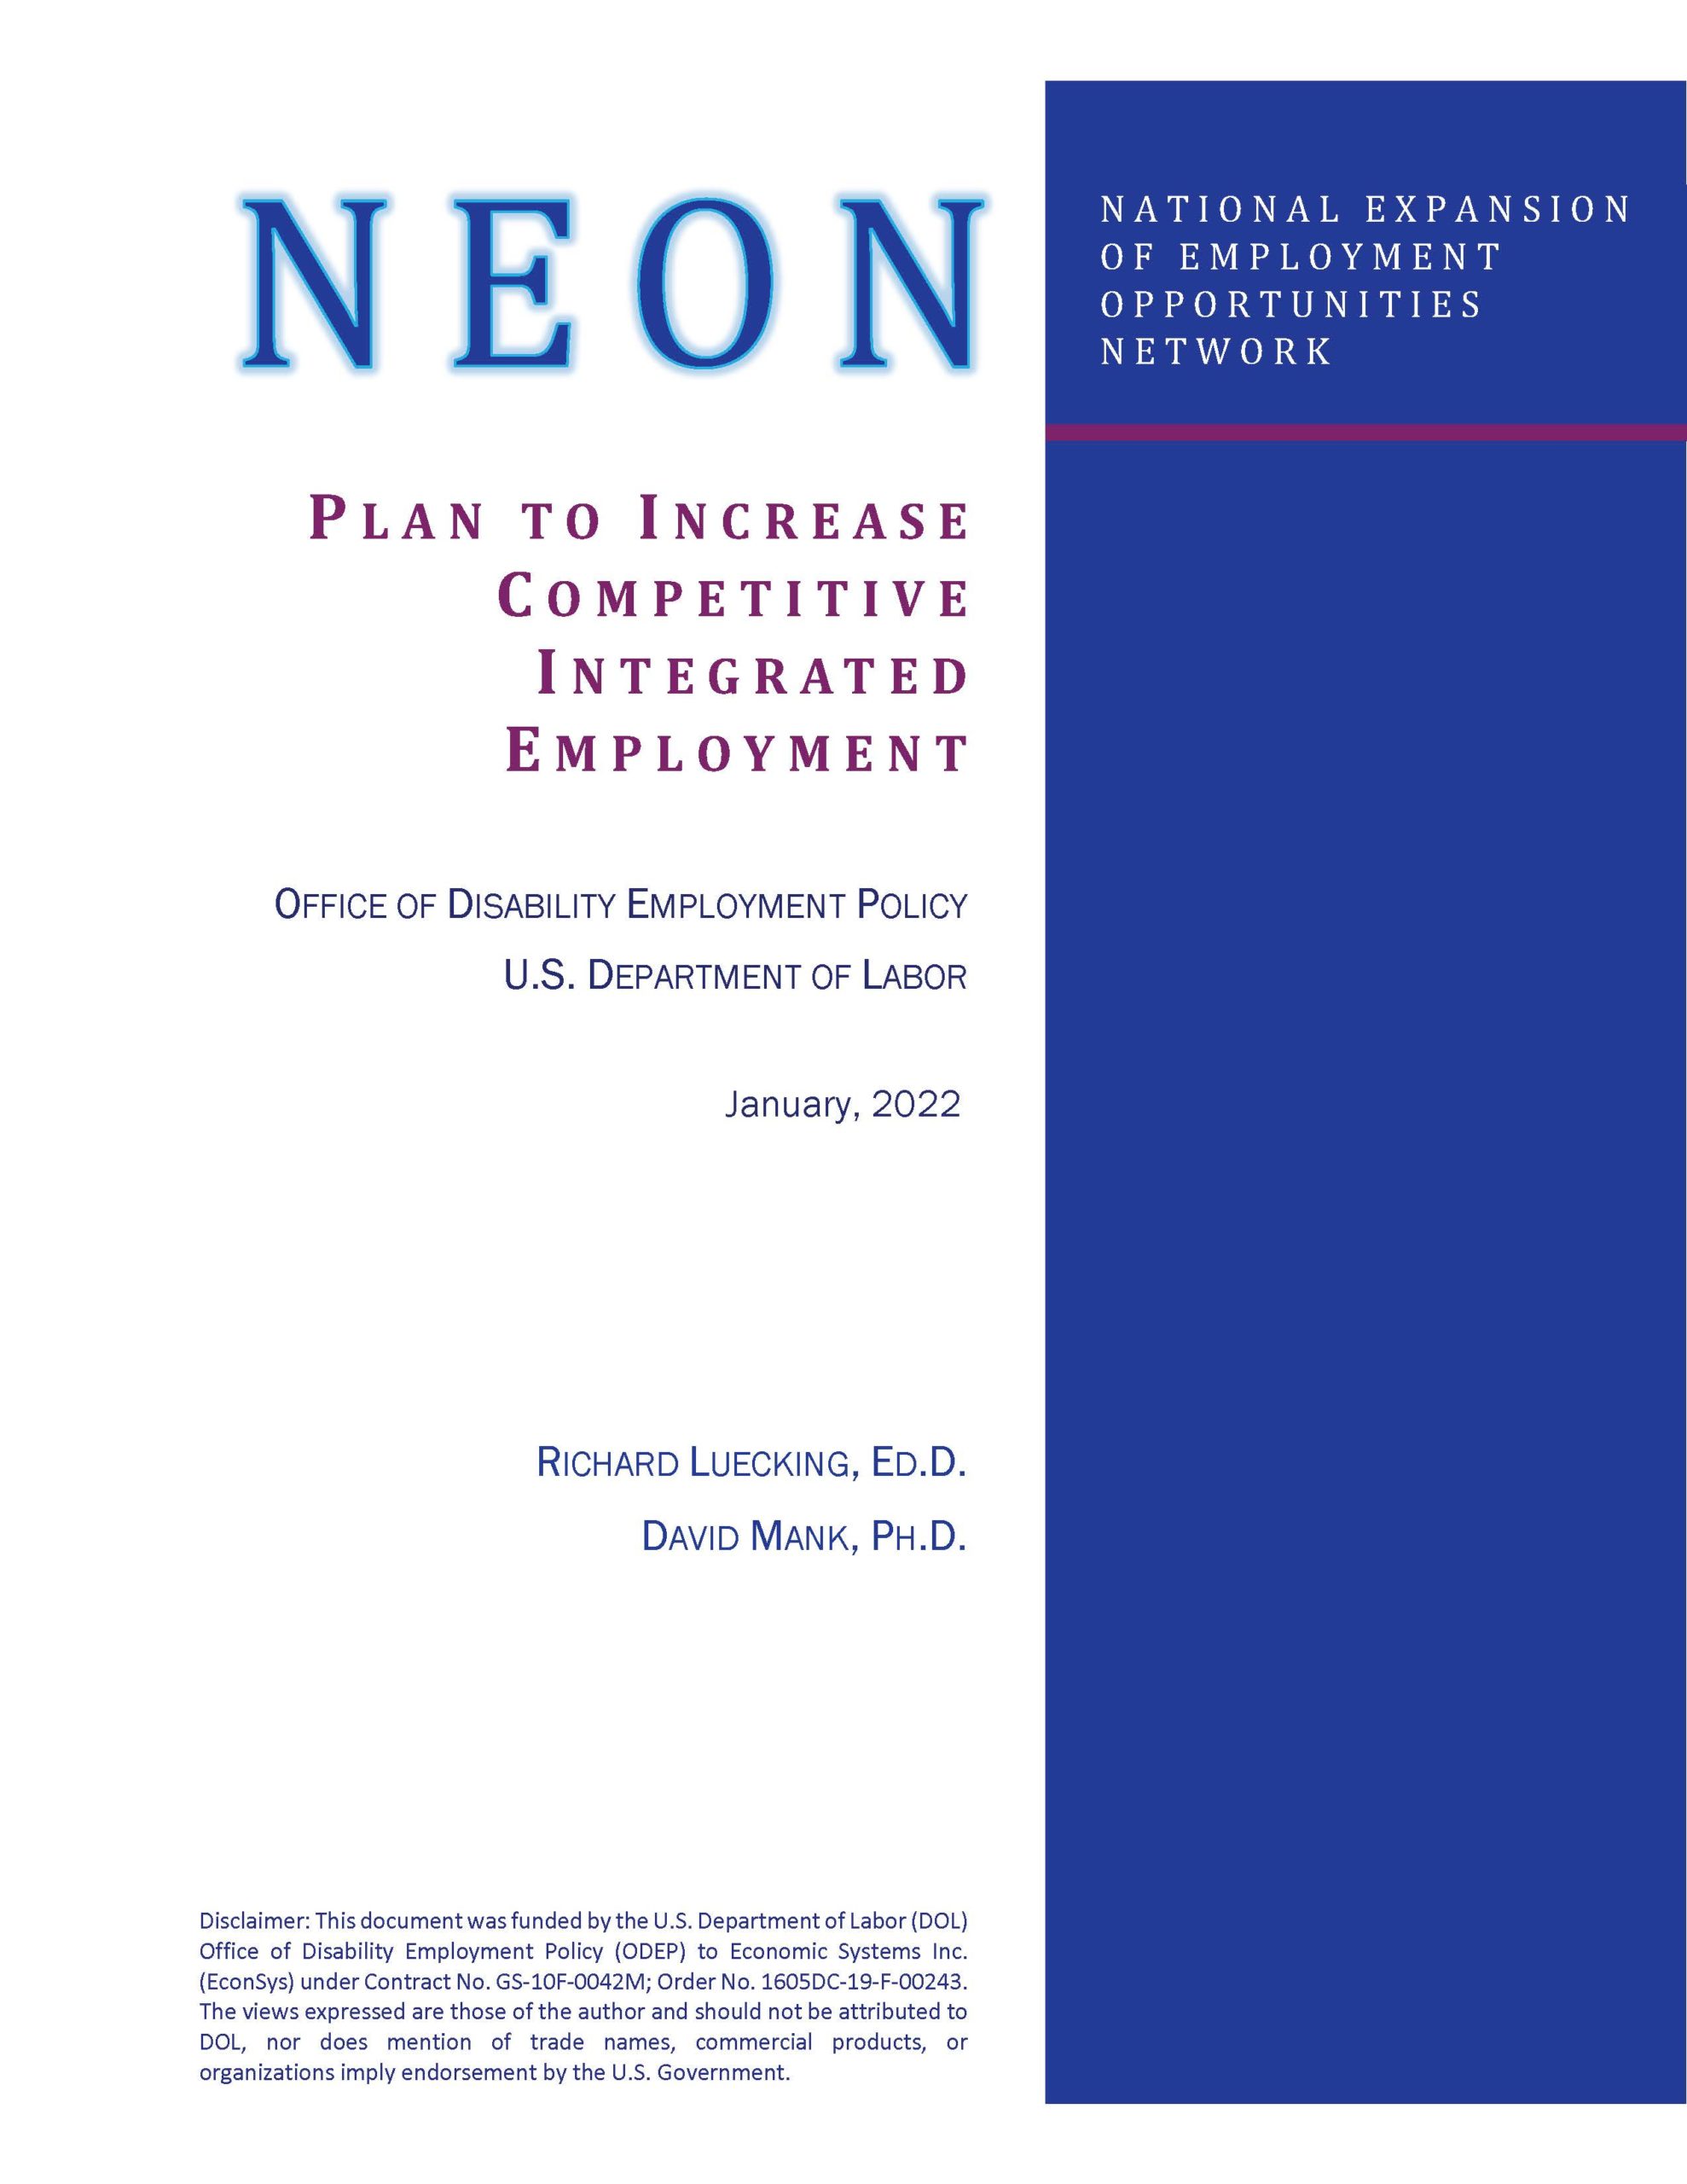 NEON Nation Plan to Increase Competitive Integrated Employment